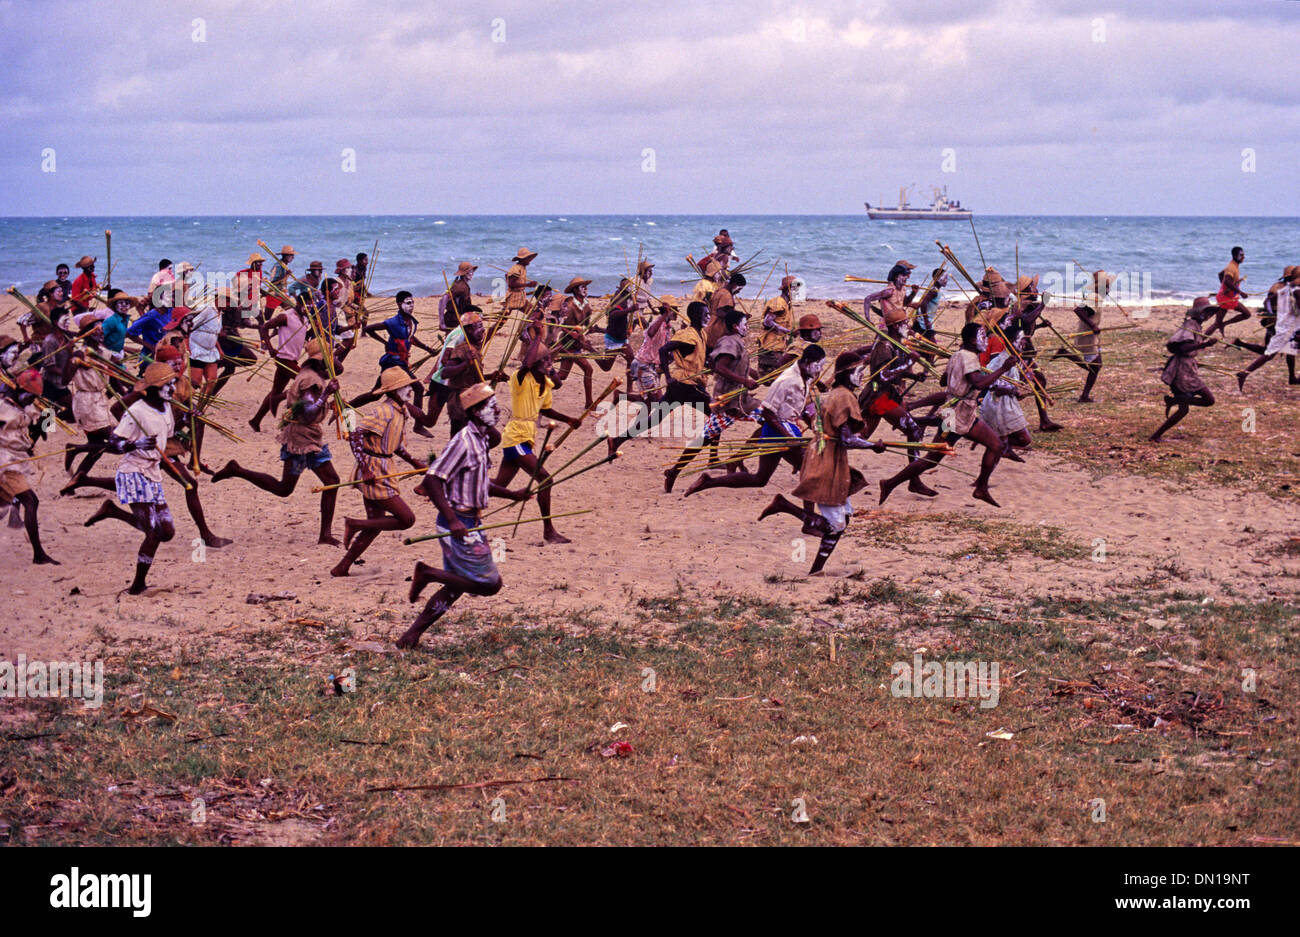 Mock Battle or Tribal Fight as Tribal Warriors of Antaimoro Tribe Charge on Beach during Sambatra Circumcision Festival Mananjary Madagascar Stock Photo